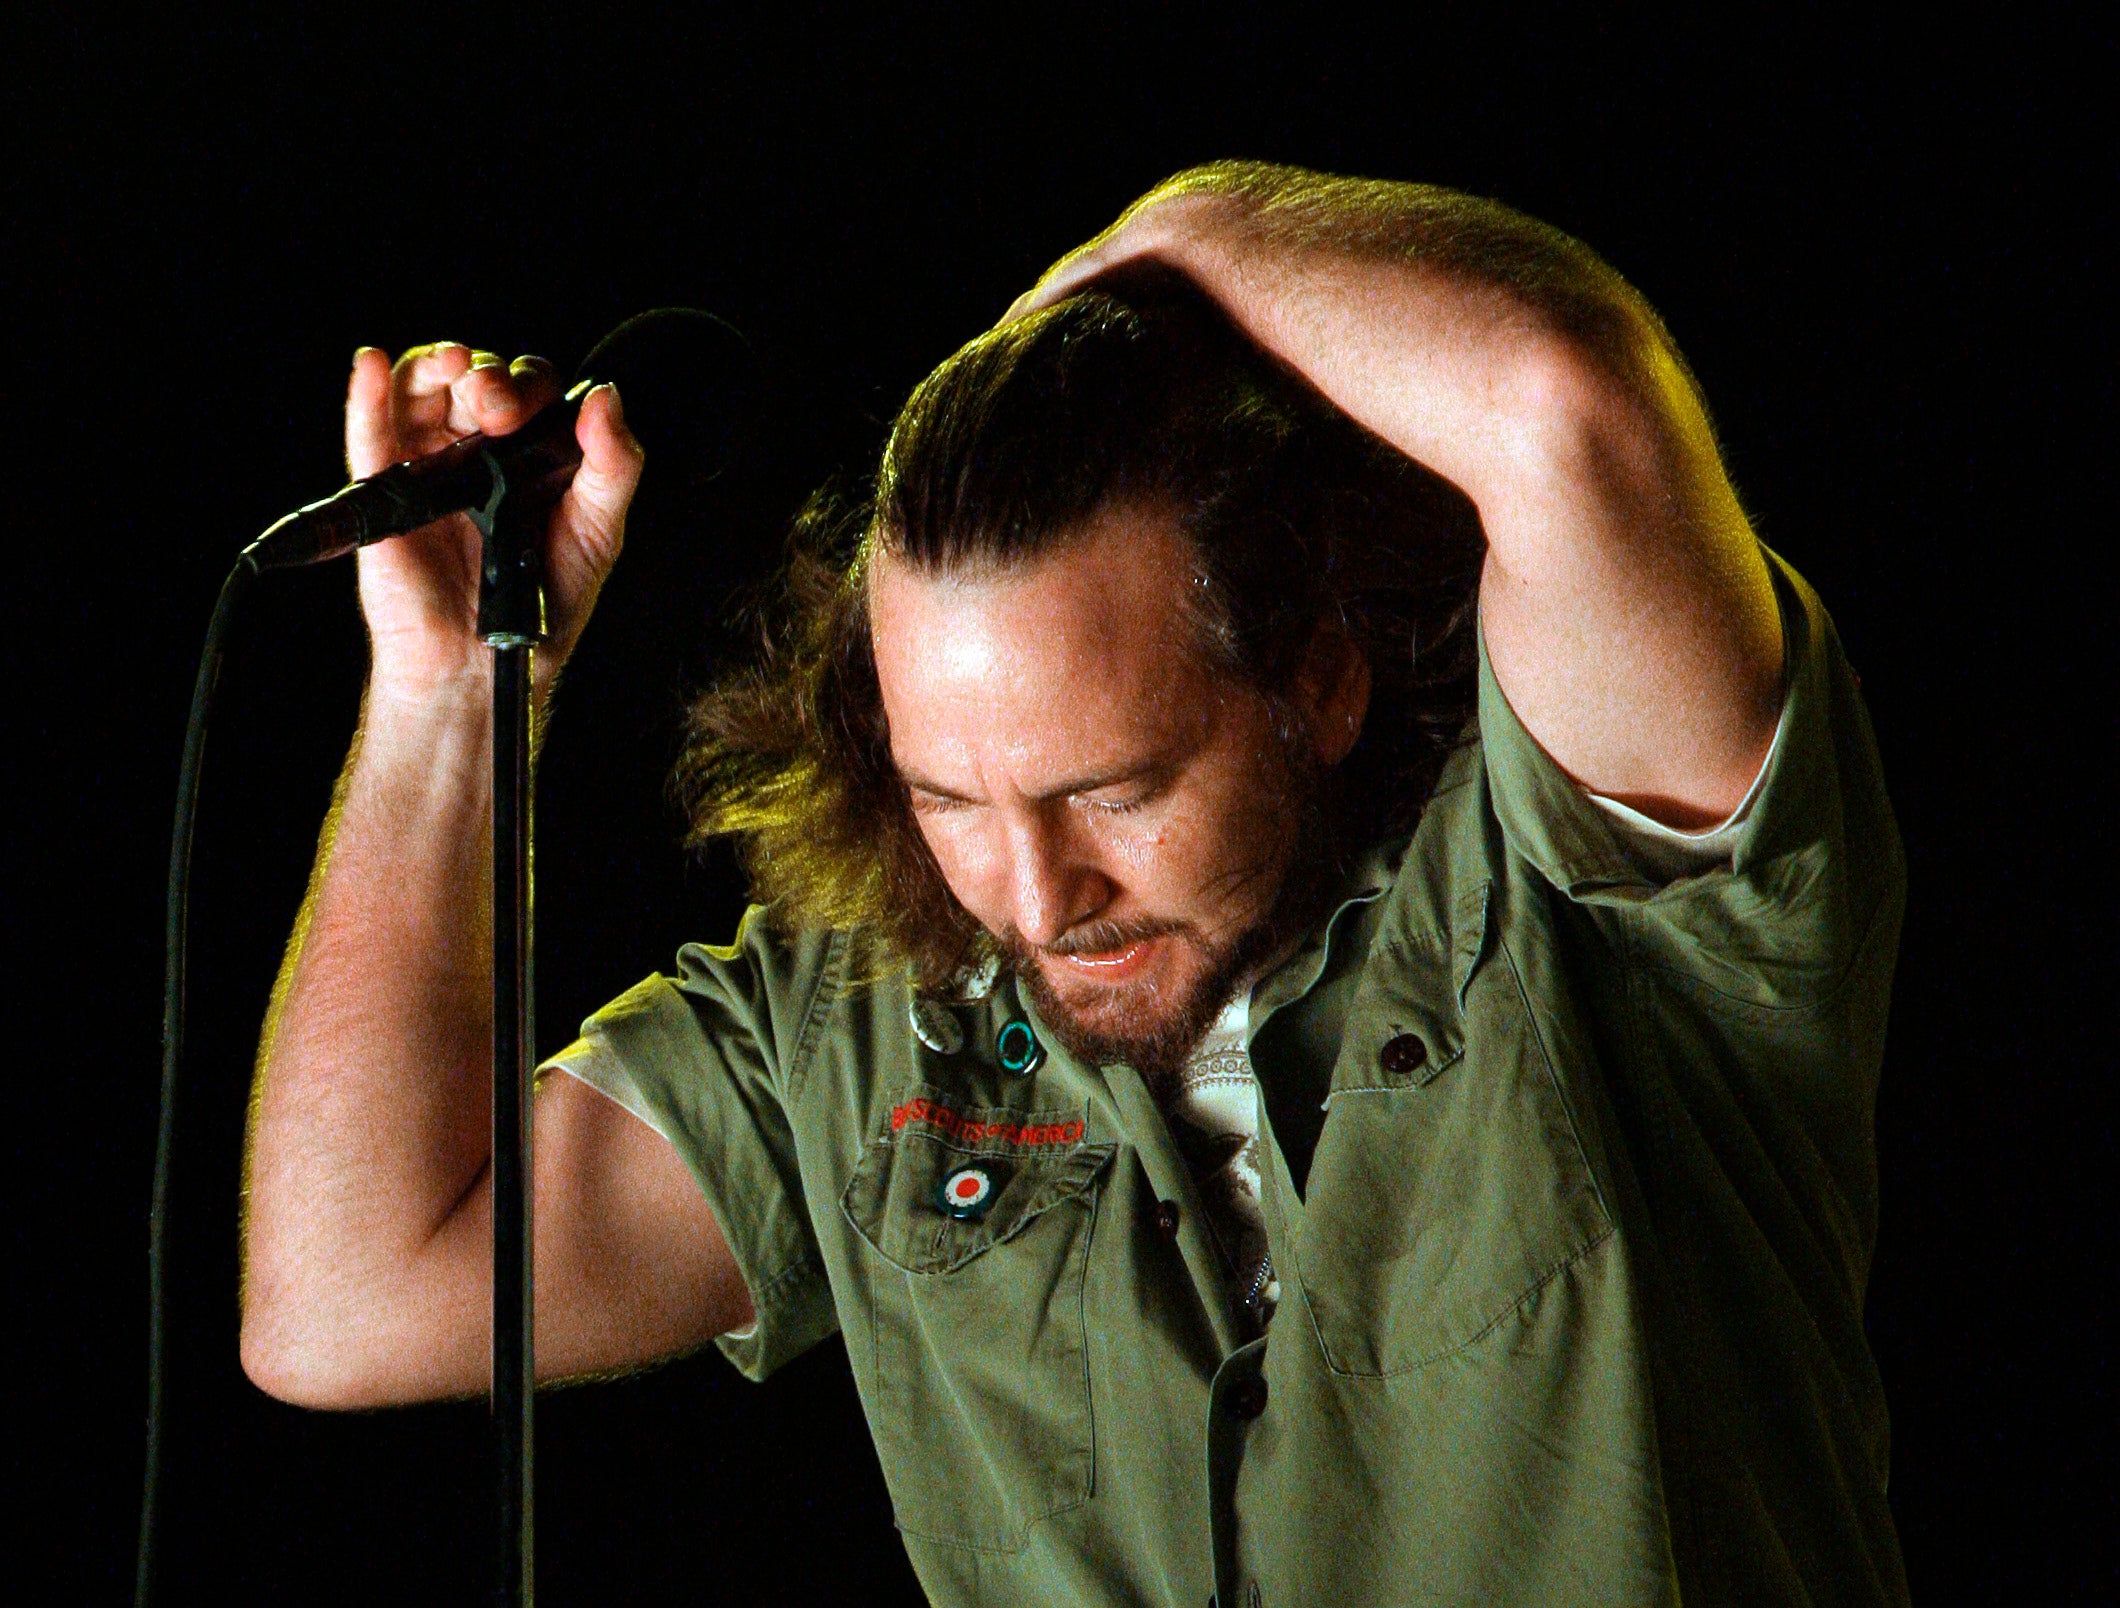 Pearl Jam lead singer Eddie Vedder performs at the Bonnaroo music festival in Manchester, Tenn., June 14, 2008. In 1994 Pearl Jam filed a complaint against Ticketmaster with the Justice Department, claiming that the company used its position in the industry to stop promoters from booking the band because they railed against Ticketmaster's pricing